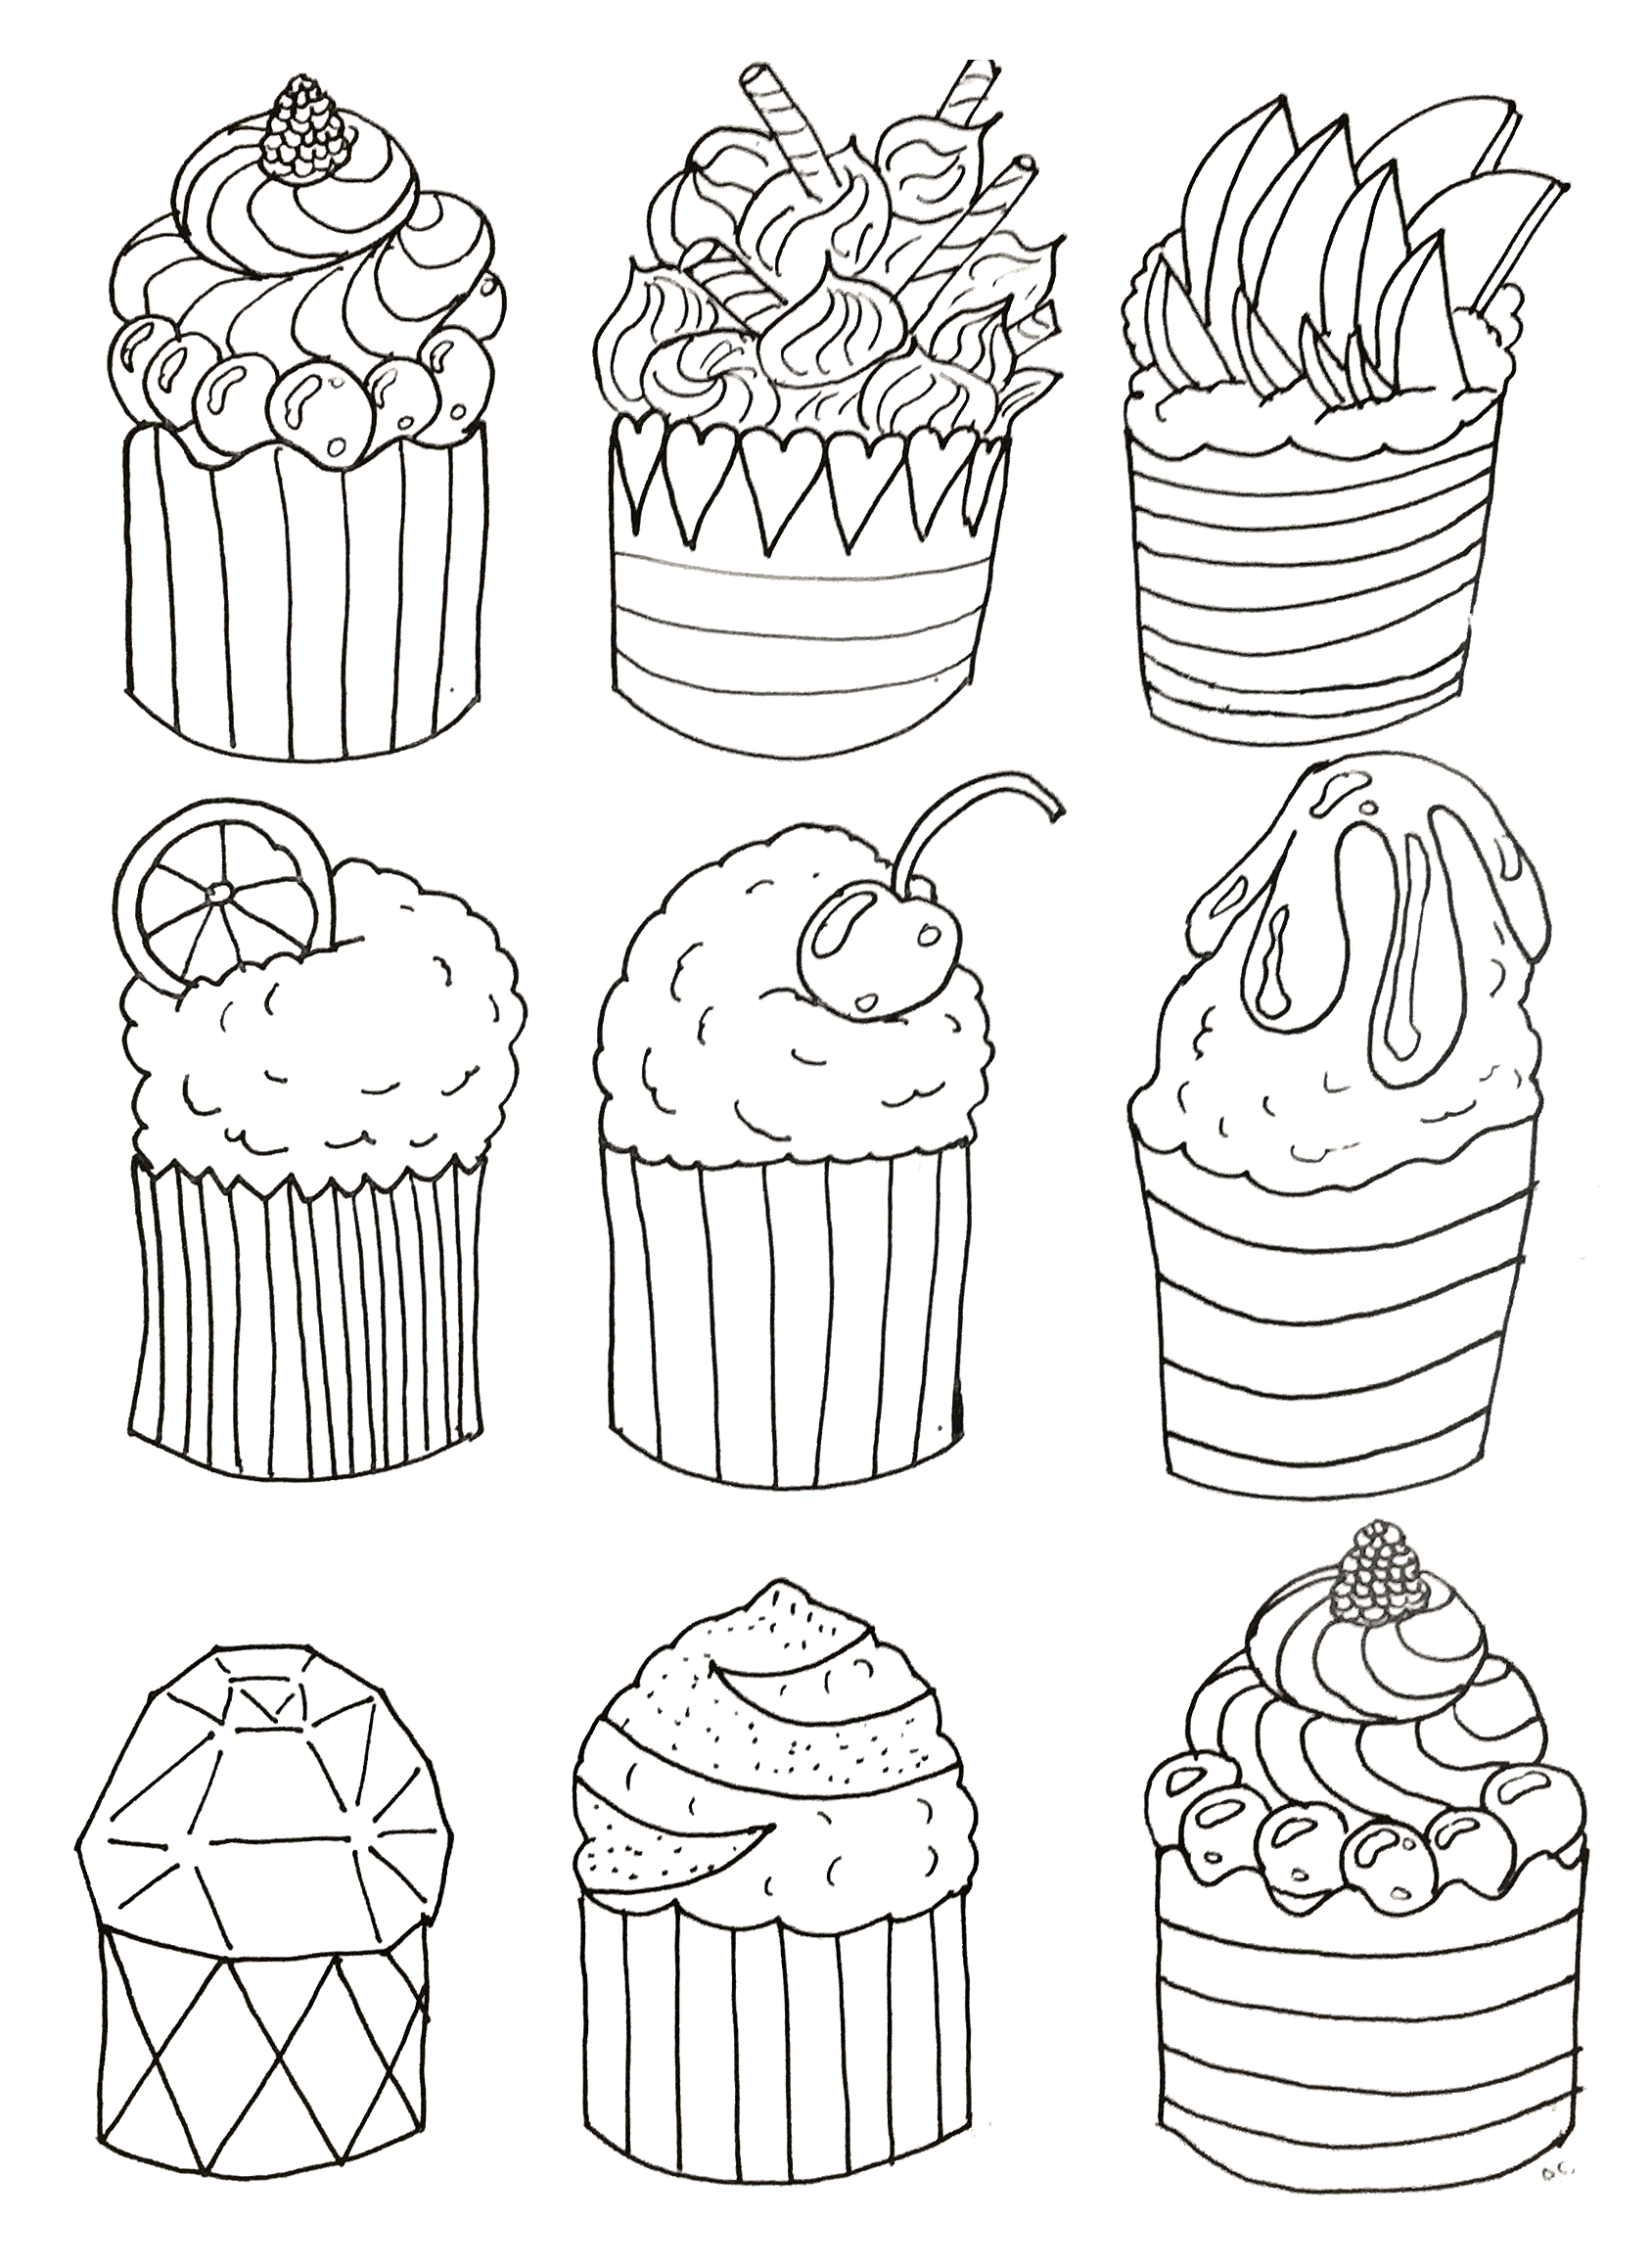 Simple Cupcakes By Olivier